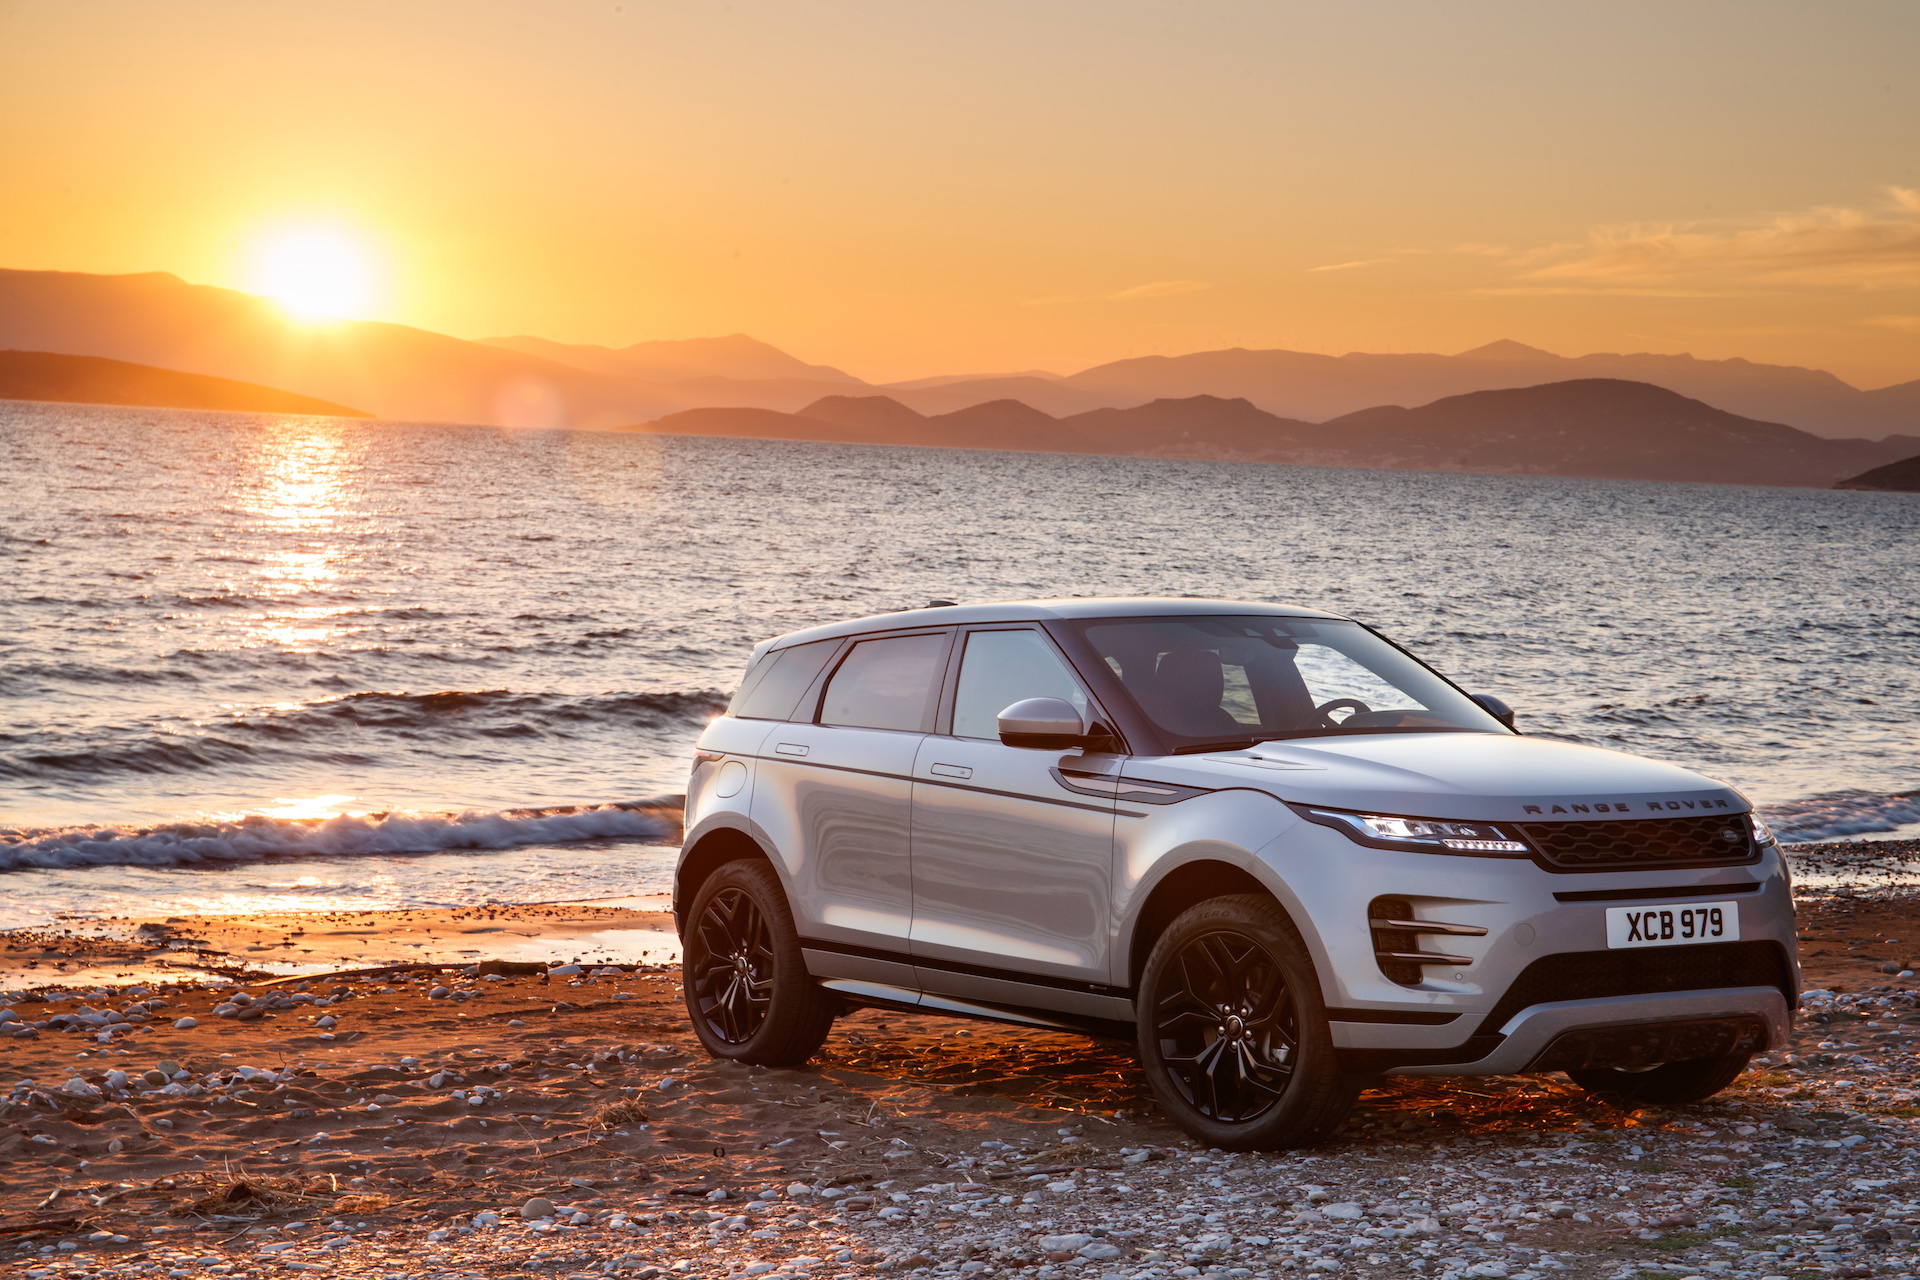 2020 Land Rover Range Rover Evoque Review, Ratings, Specs, Prices